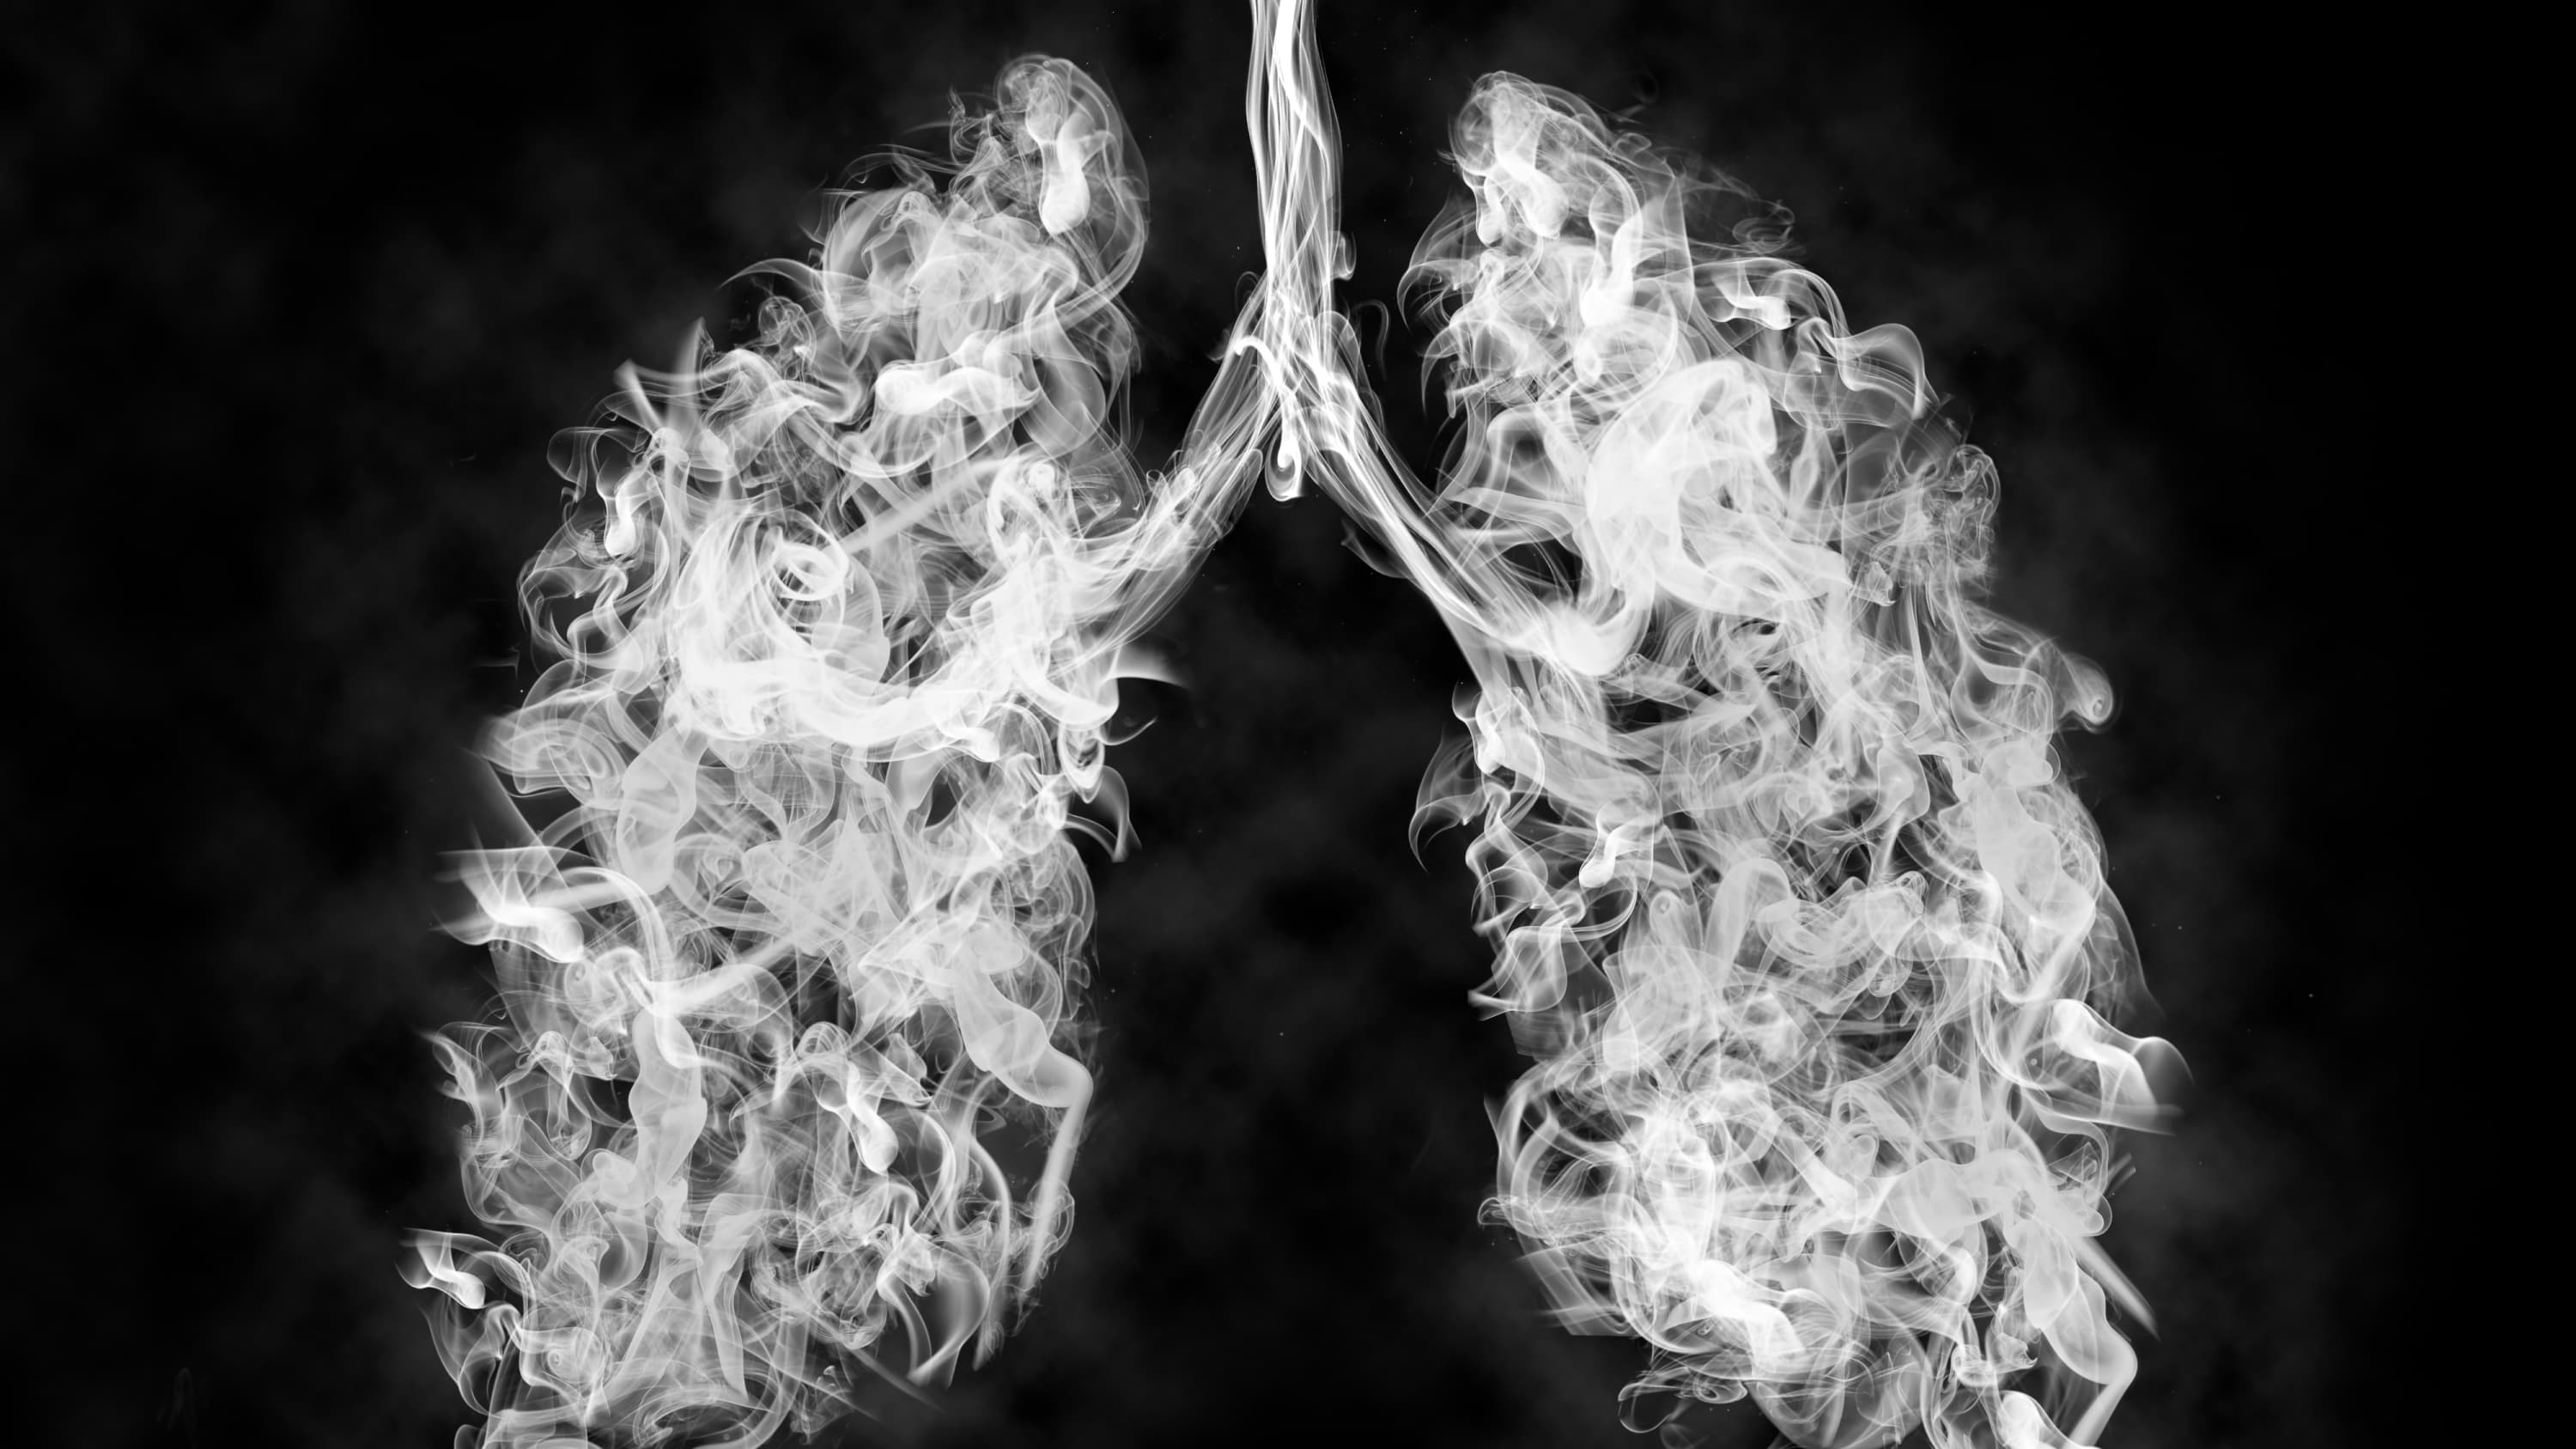 Illustration of smoke in lungs, representing the dangers of vaping